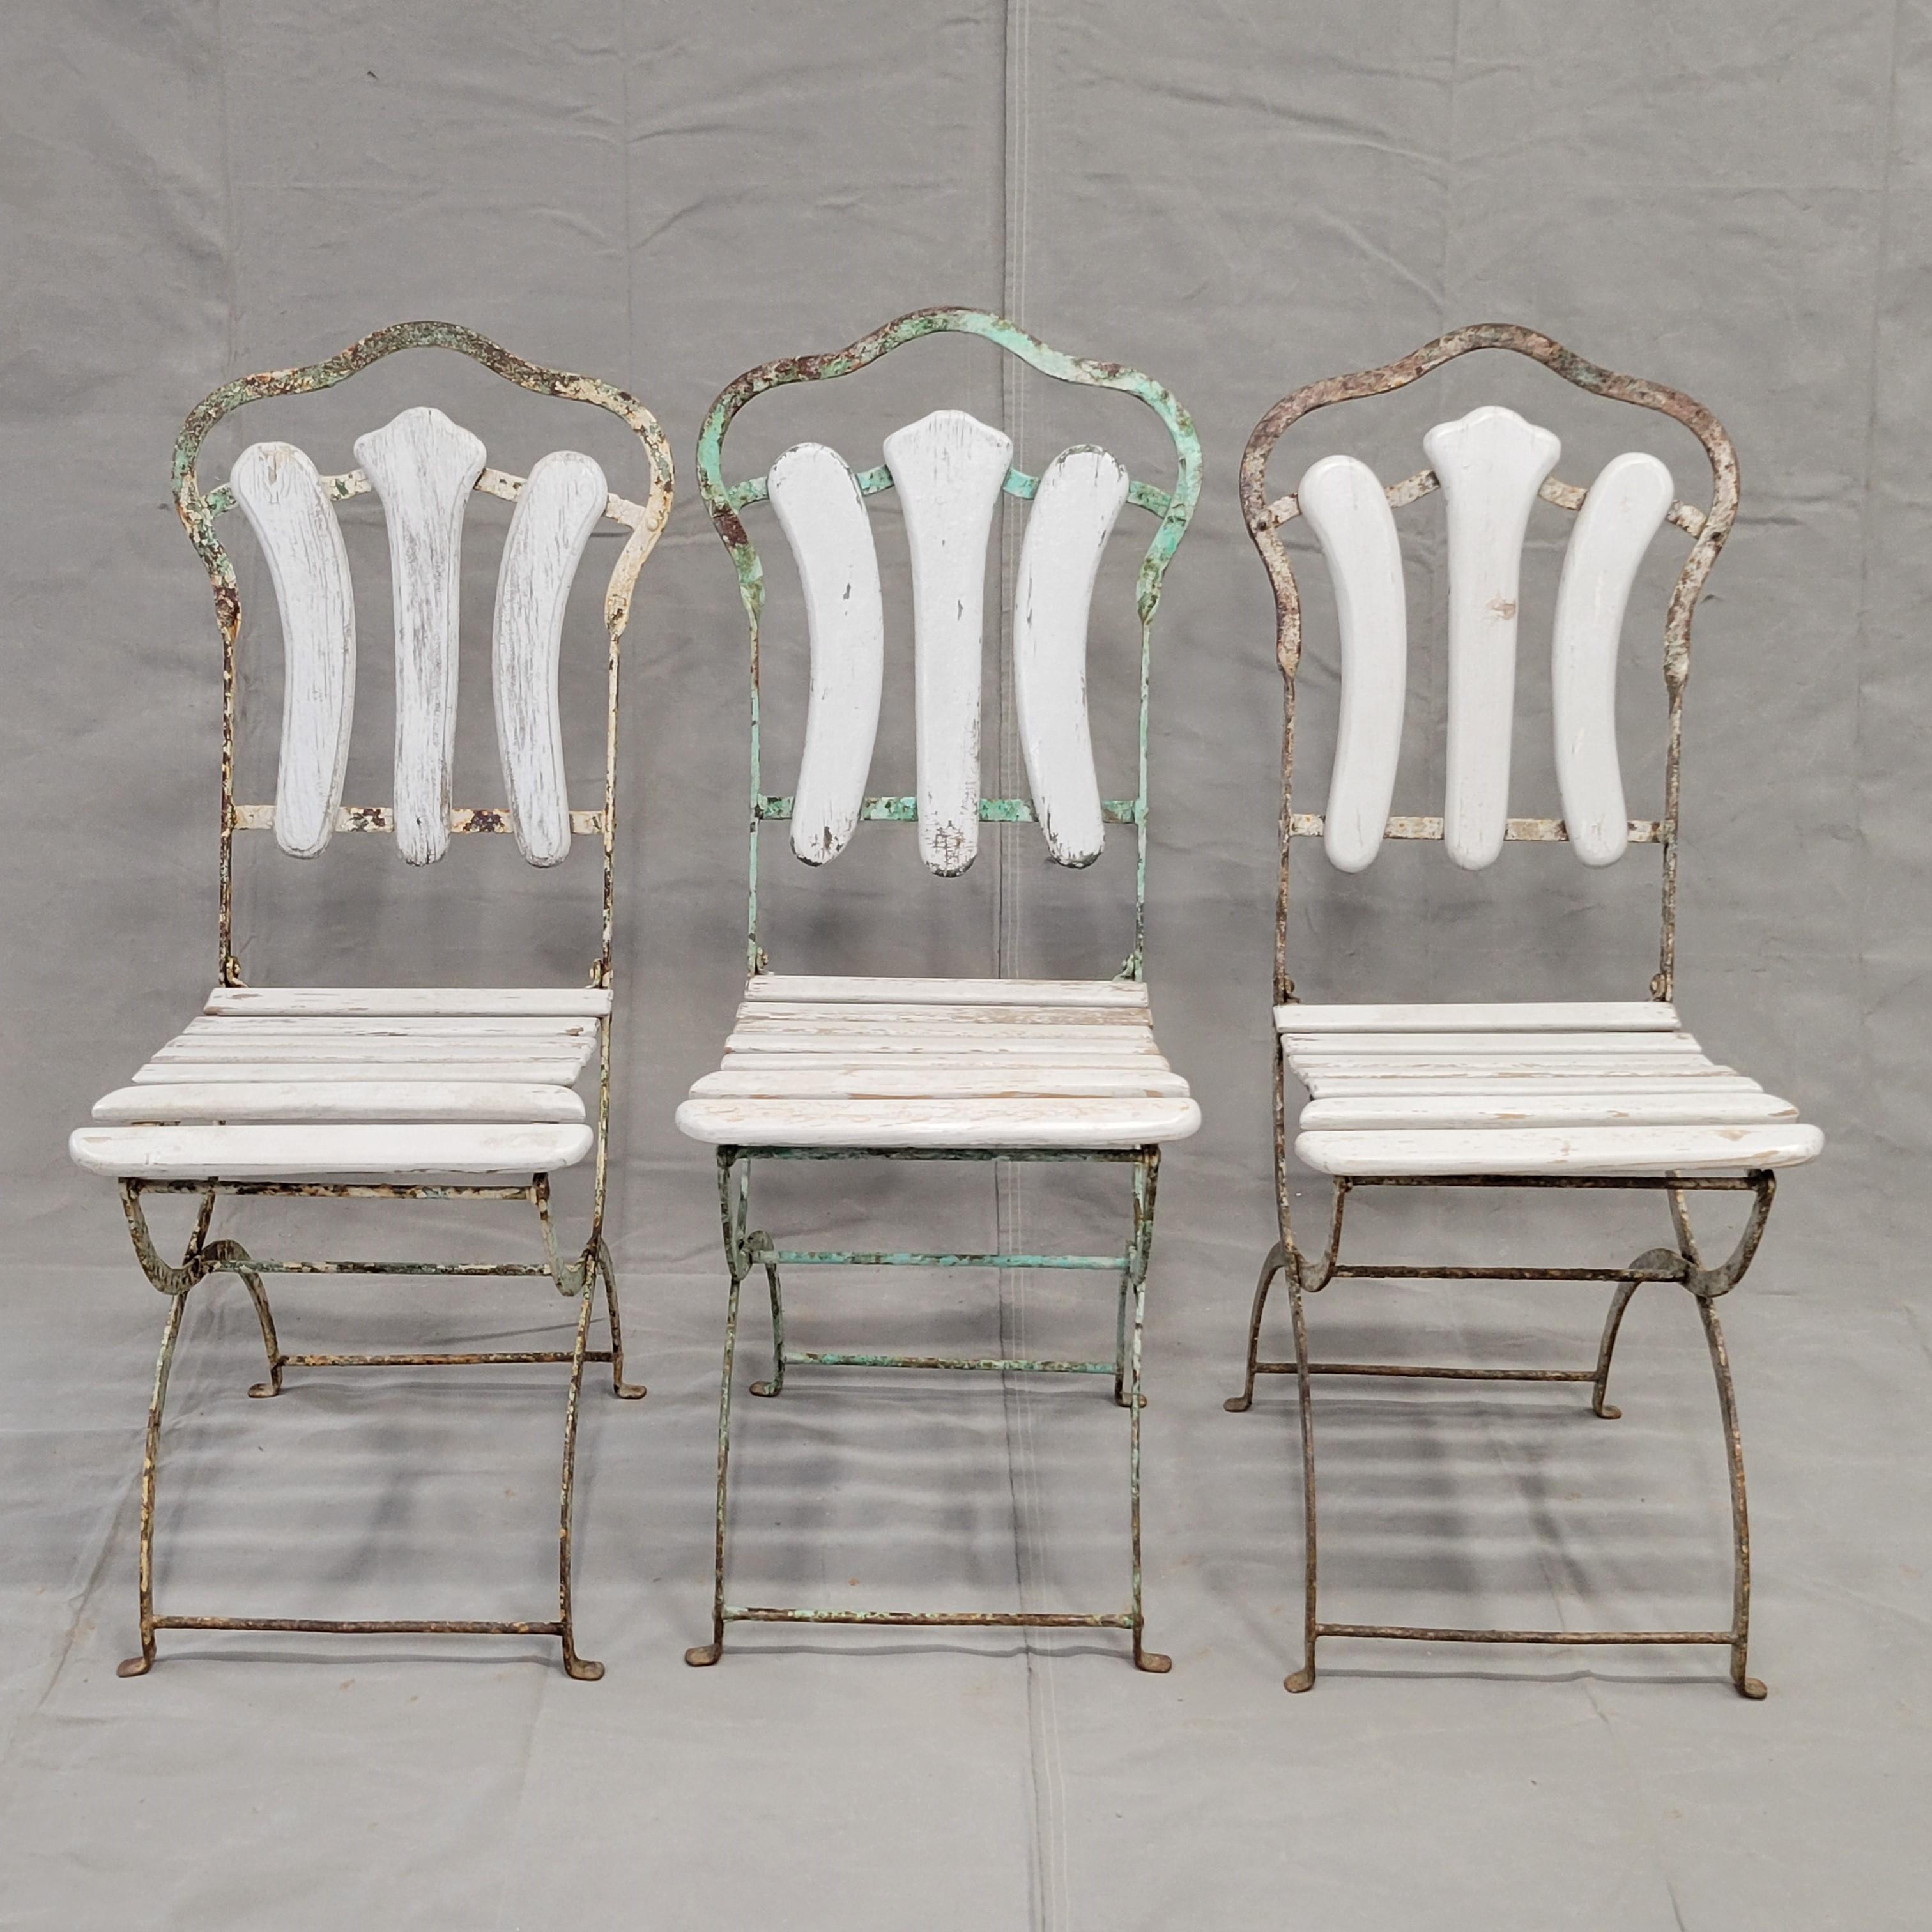 A charming set of antique French iron and wood folding bistro garden chairs. Peeling paint and rust on the iron as well as weathering on the wood lends to the rustic, shabby chic appeal, but they are still strong and very functional. The wood slats